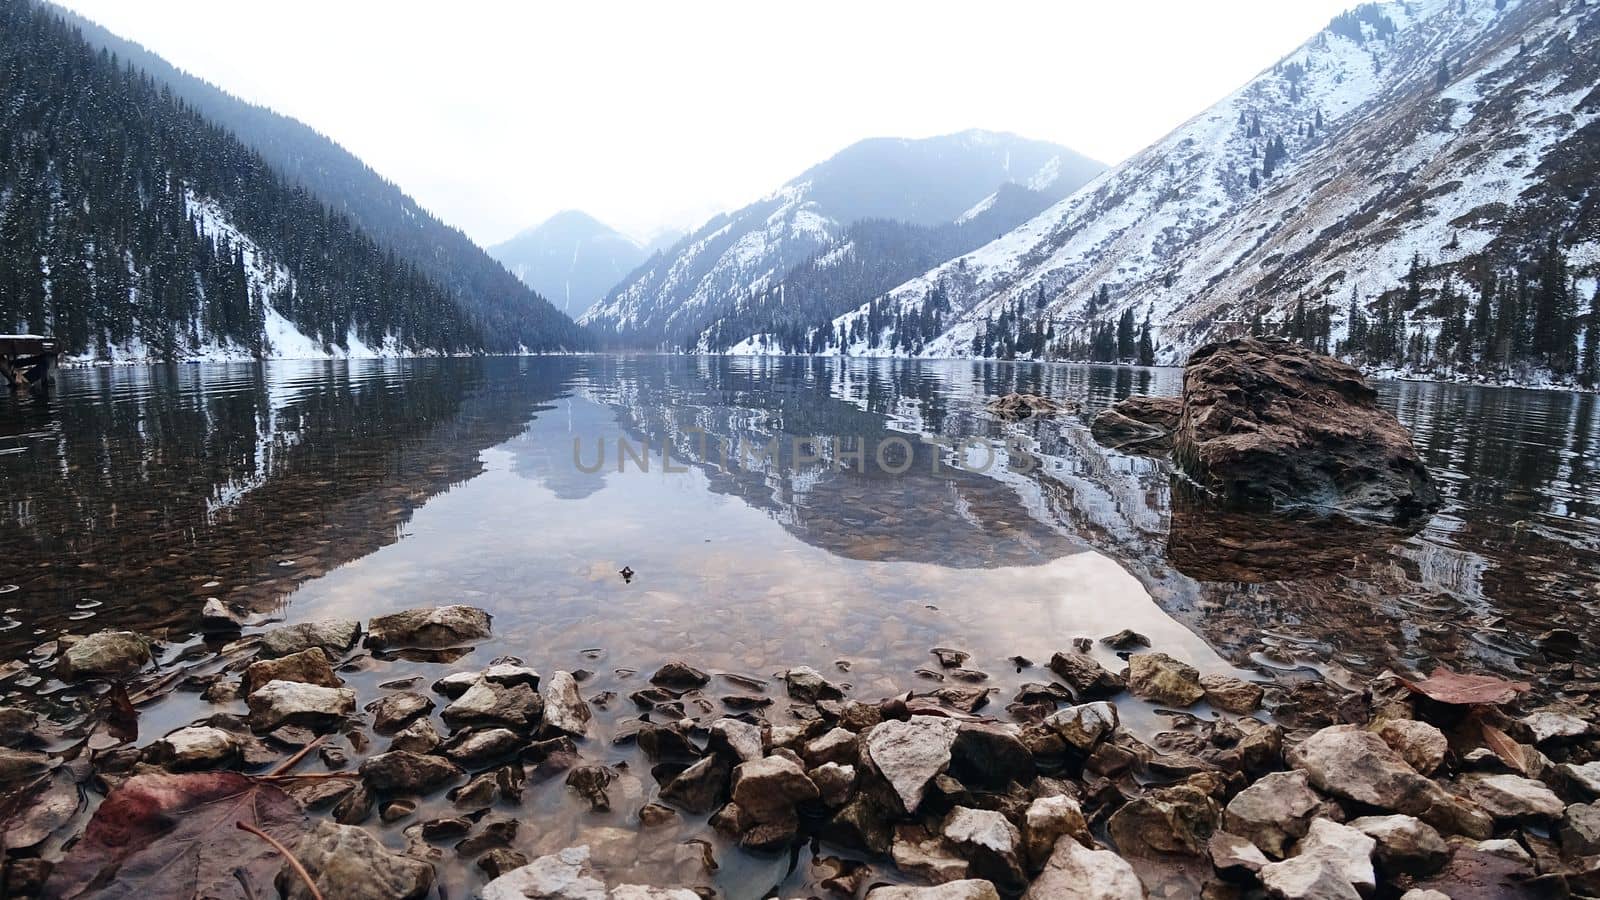 Kolsai mountain lake in the winter forest. View of clouds, coniferous trees, mirror-smooth water, hills and mountains in the snow. The landscape is reflected in the water. There are stones and leaves